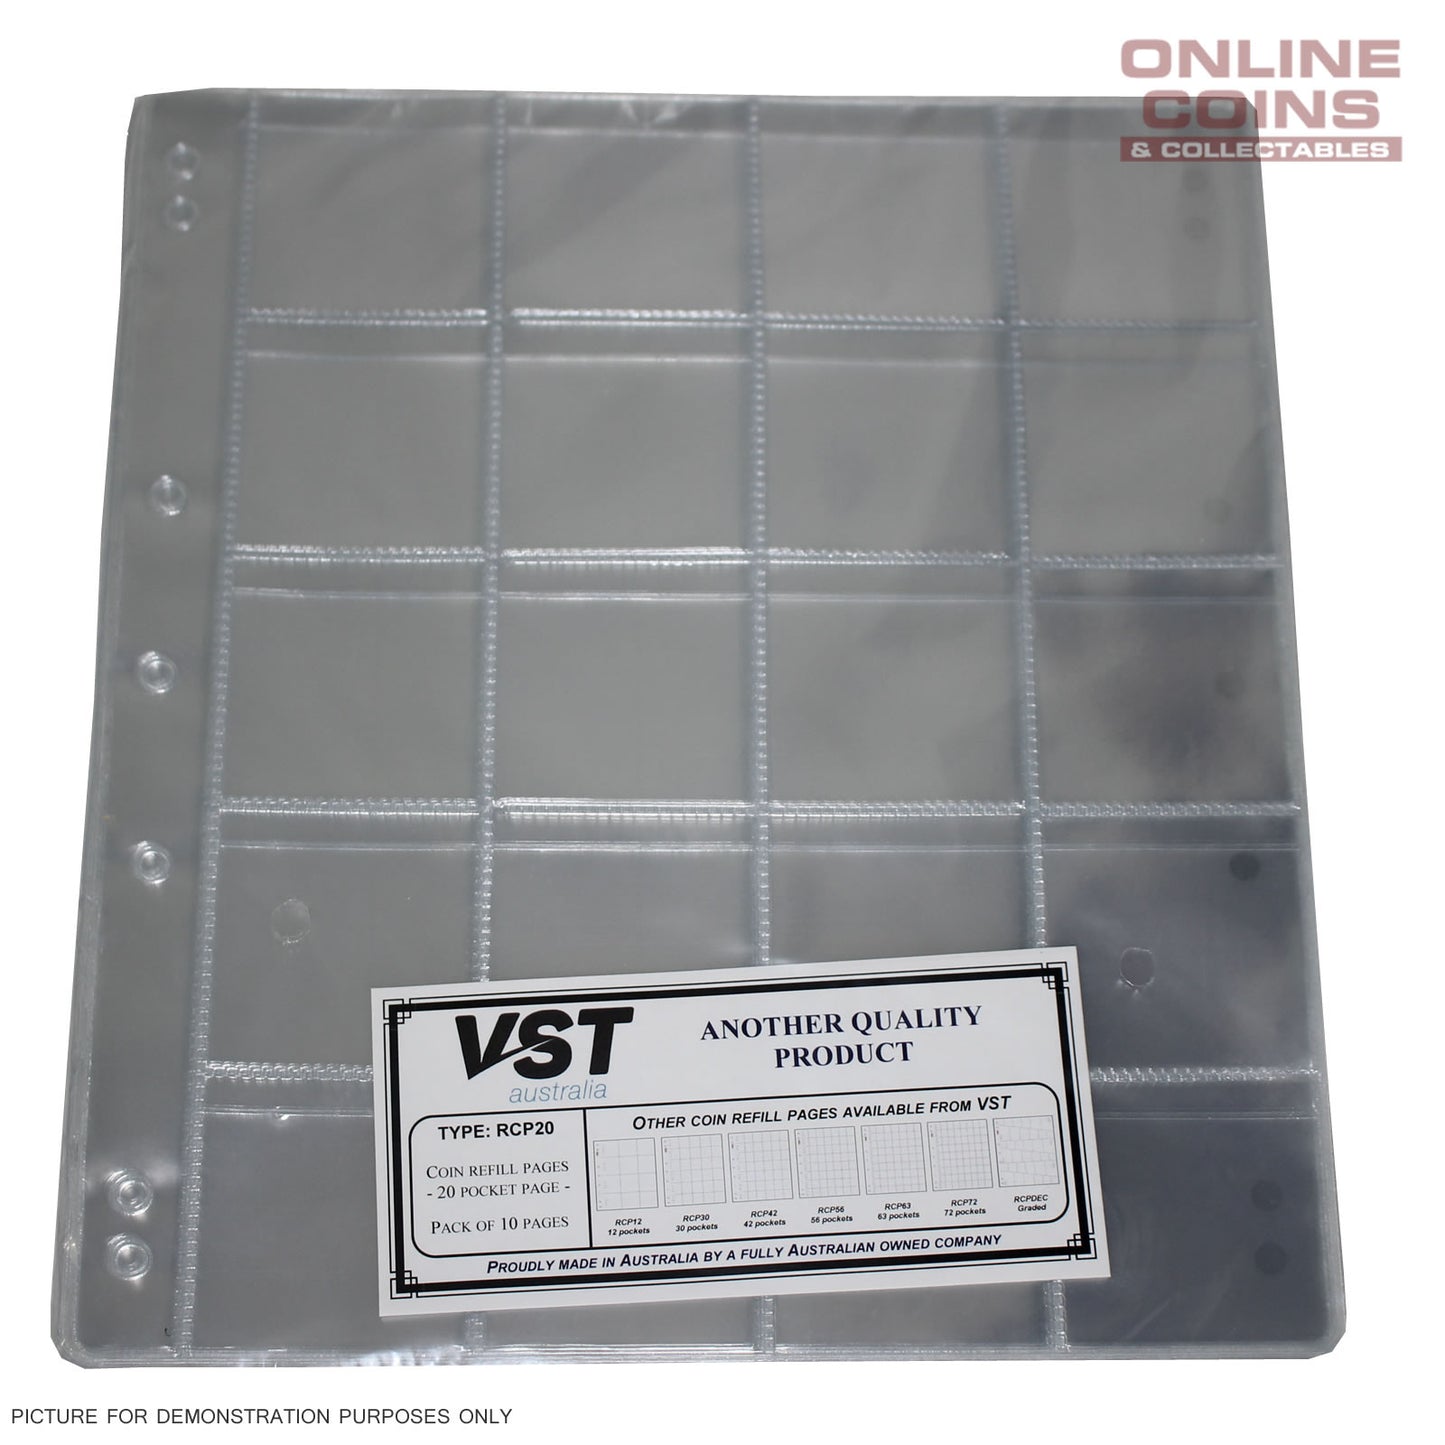 VST Coin Refill 20 Pocket Pages with Backing Pages to Suit VST Album - 10 Pages